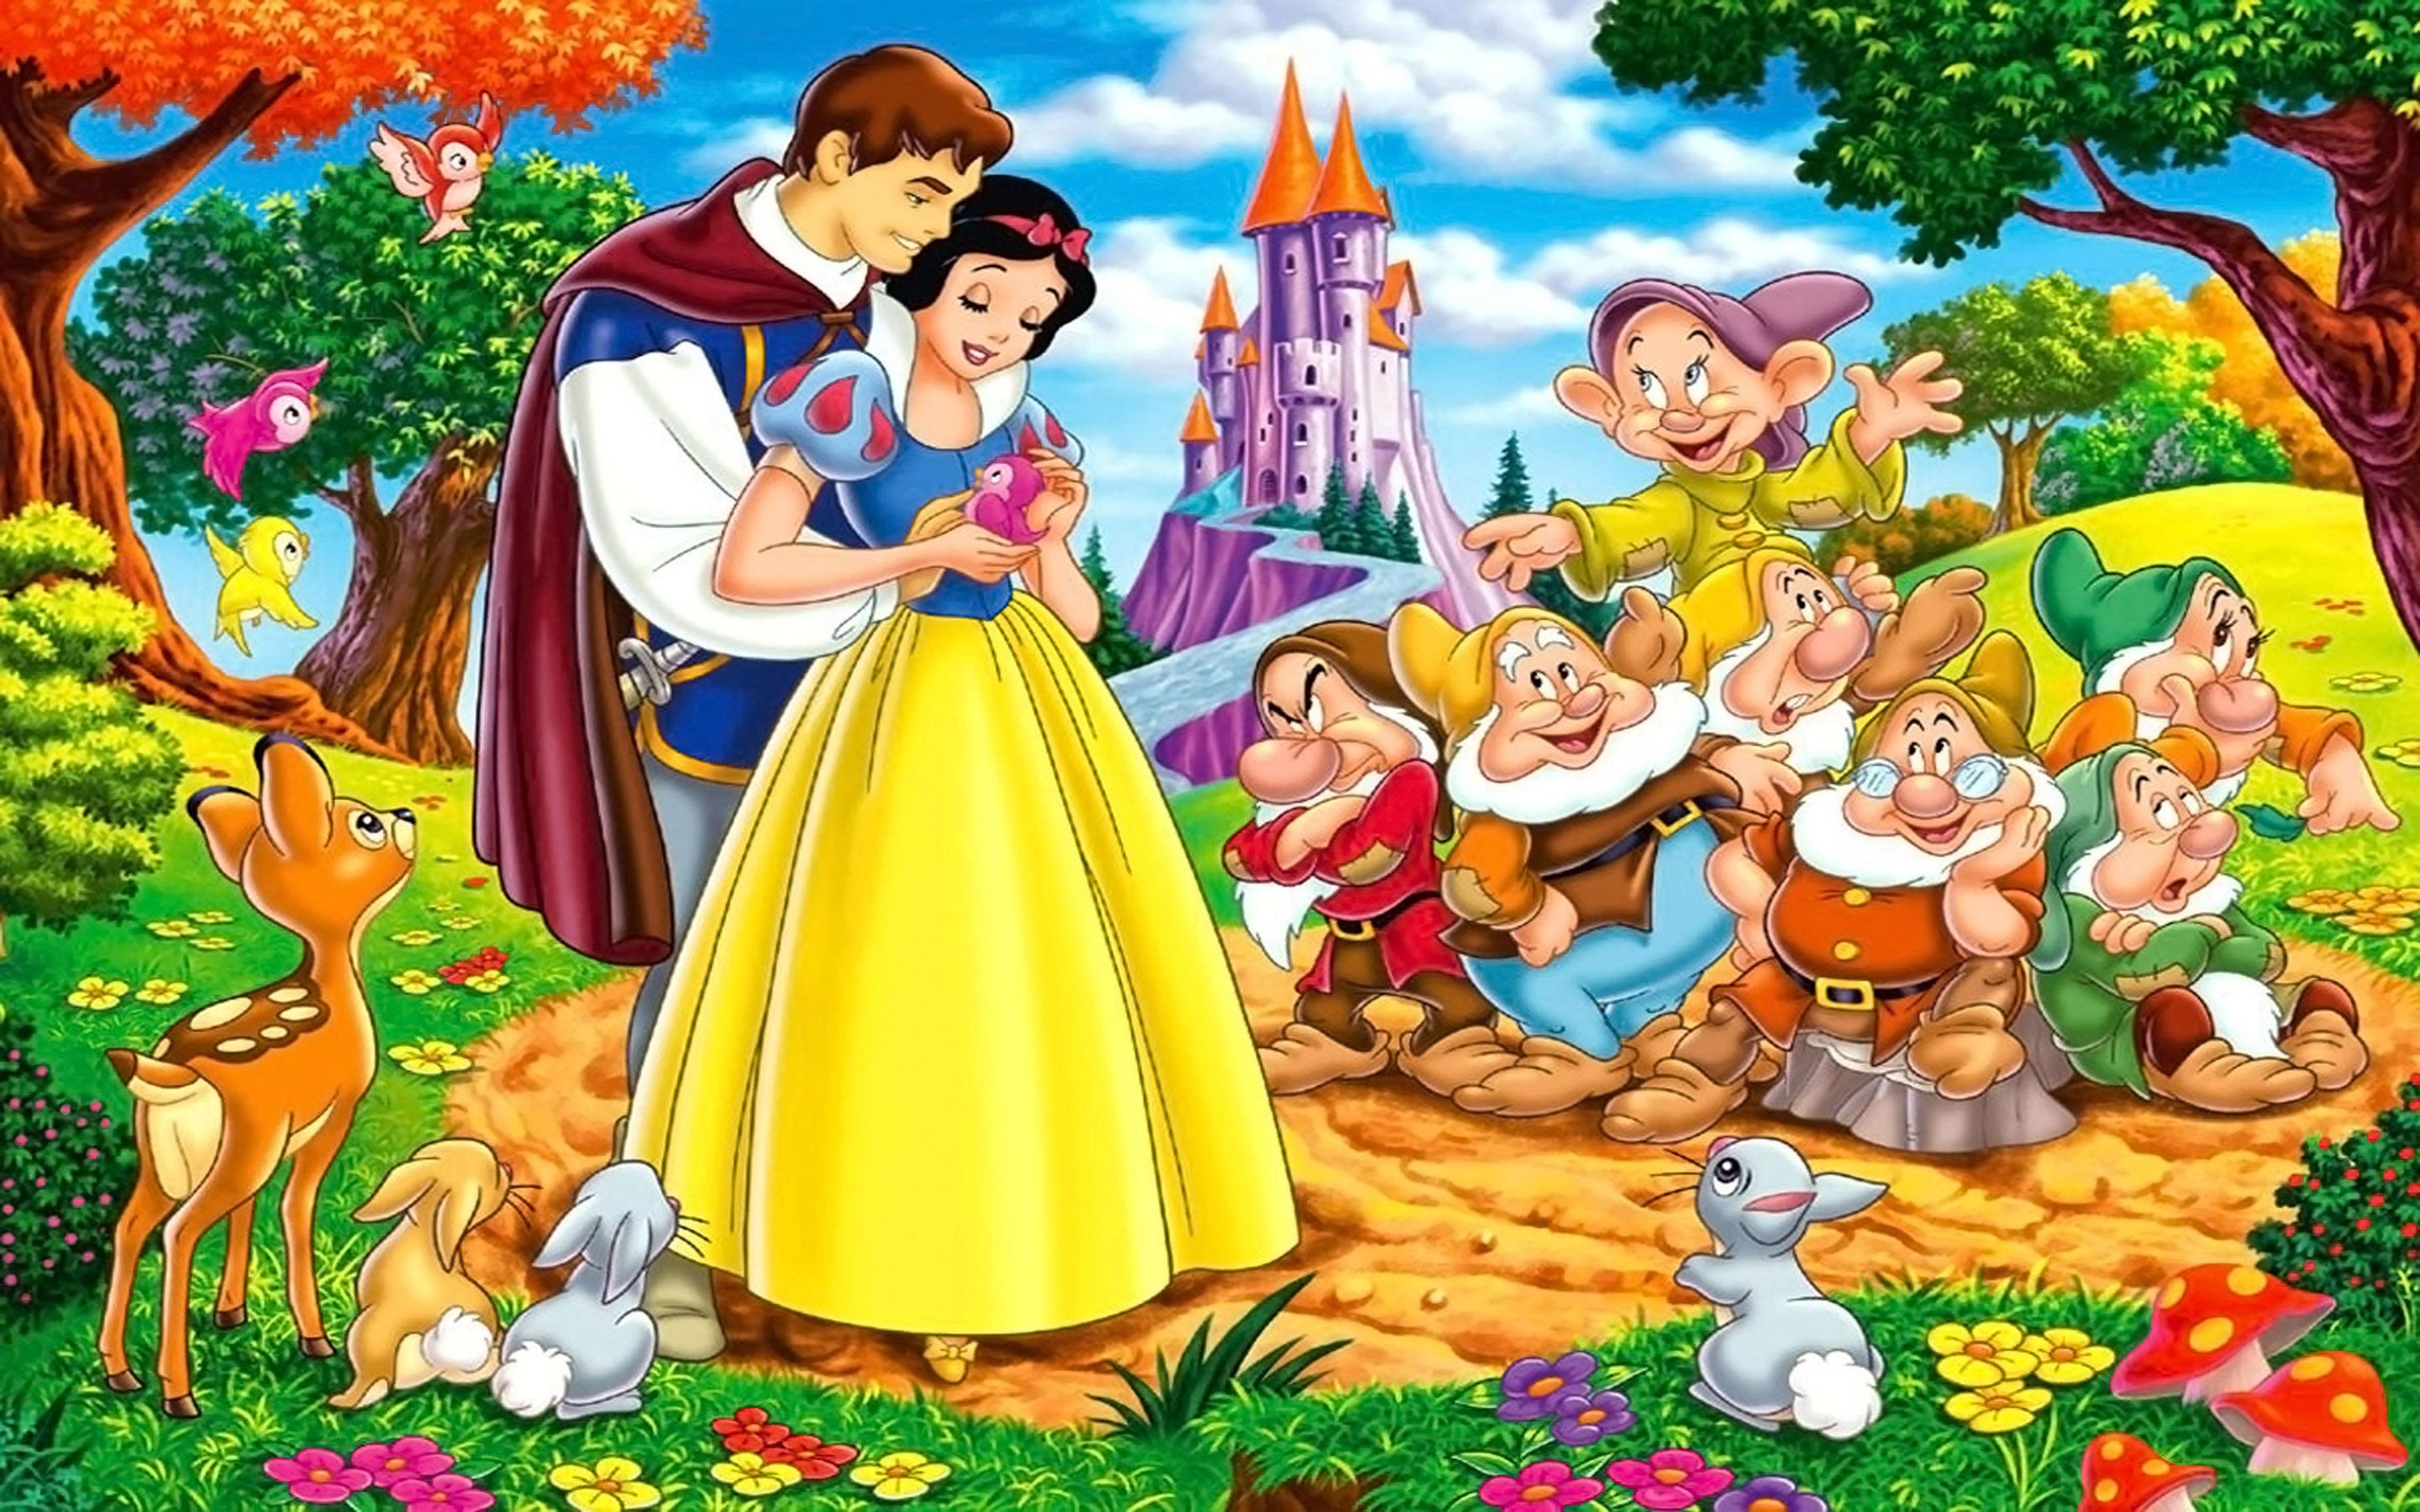 Snow White Prince And Seven Dwarfs Desktop HD Wallpaper For Mobile Phones And Computer 2880x1800, Wallpaper13.com